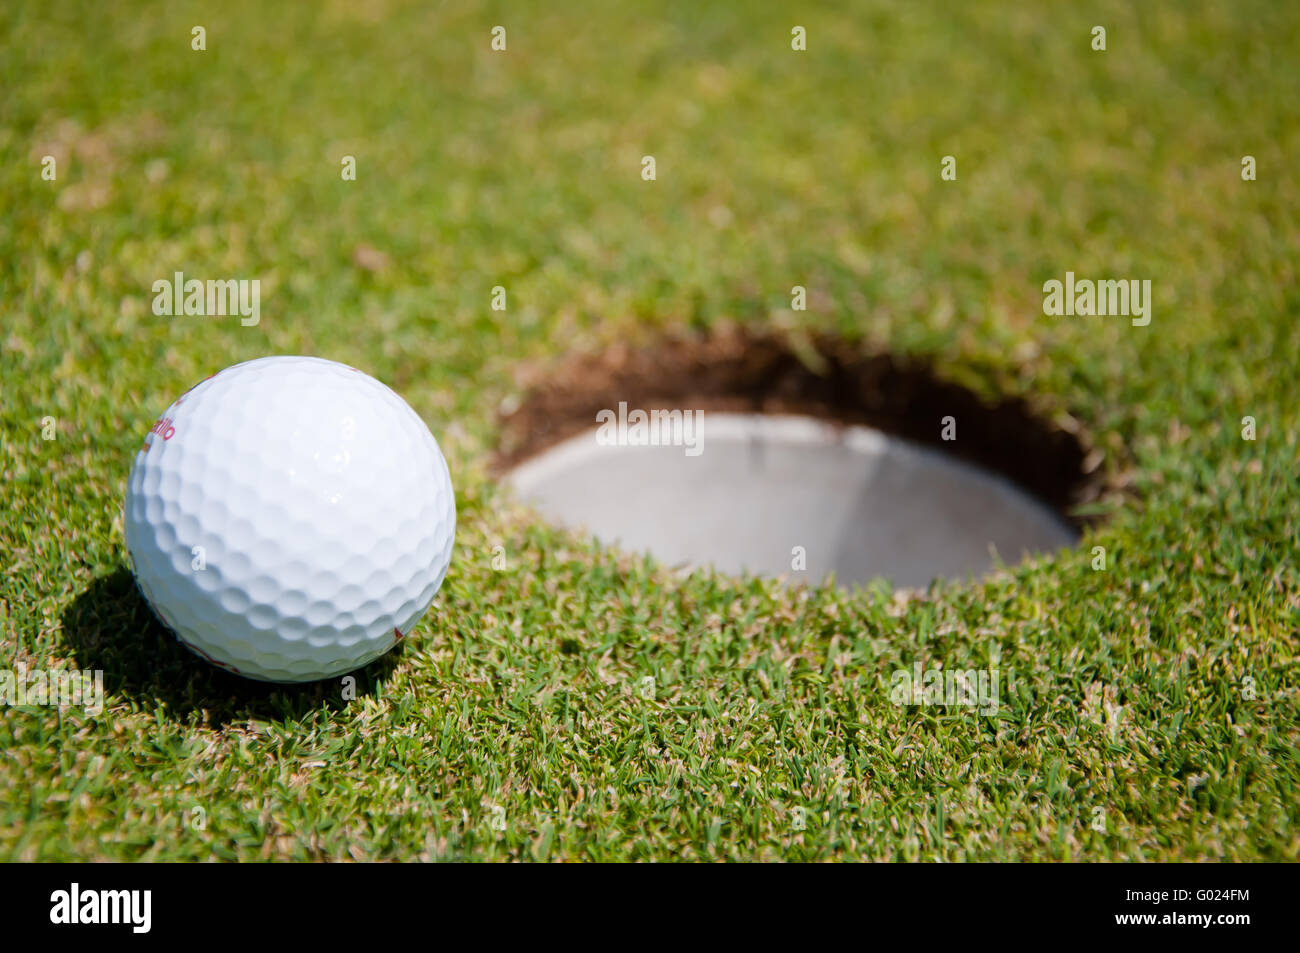 golf hole with ball Stock Photo